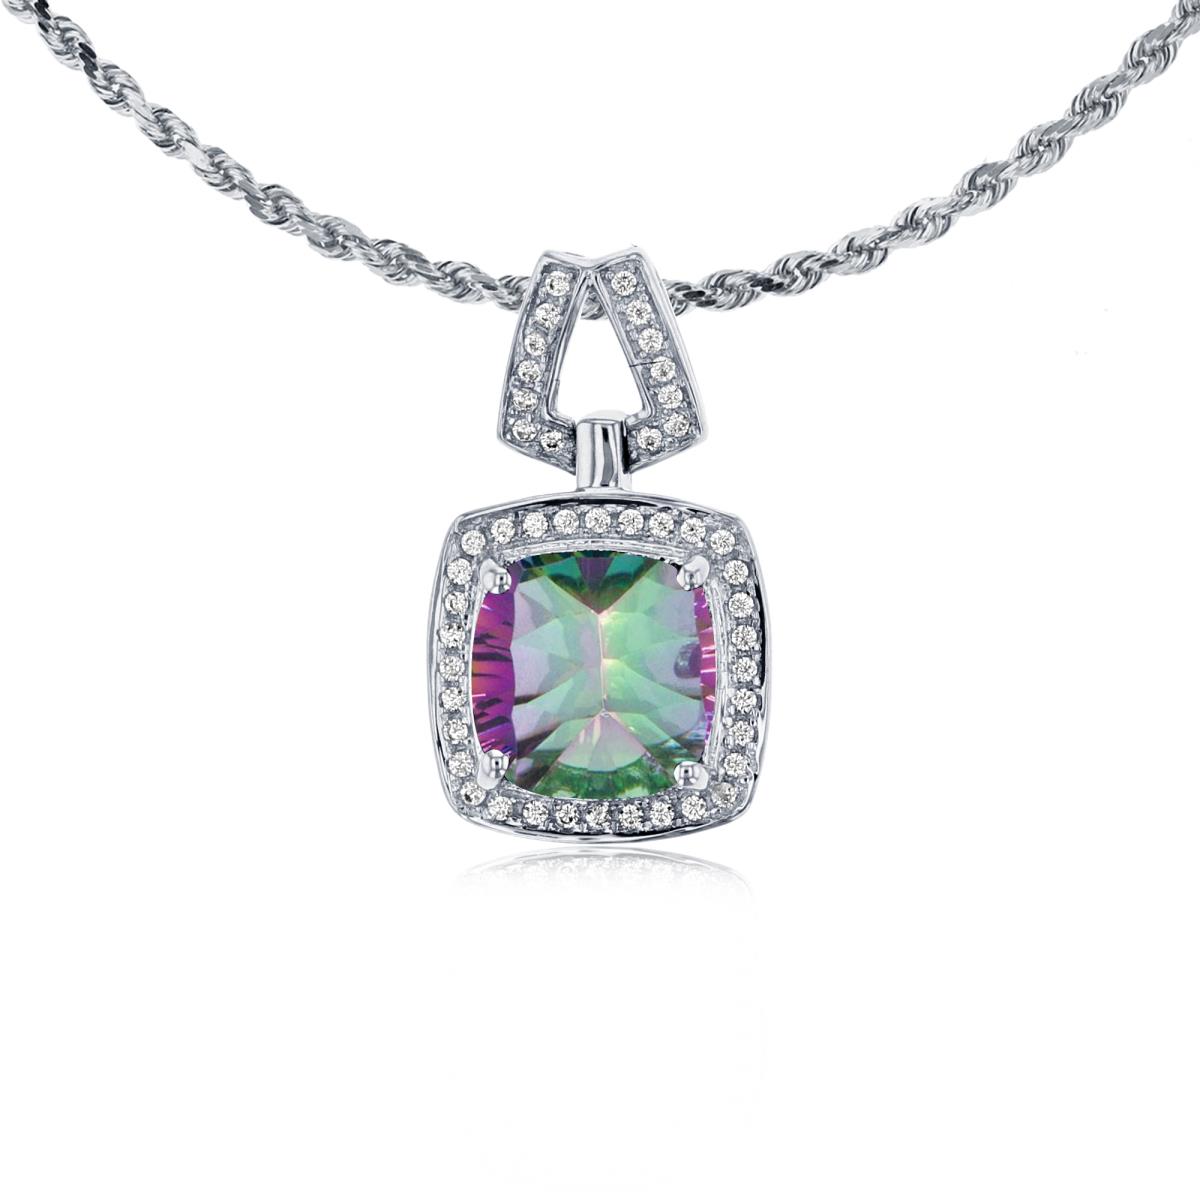 10K White Gold 7mm Cushion Mystic Green Topaz & 0.10 CTTW Diamond Halo 18" Rope Chain Necklace